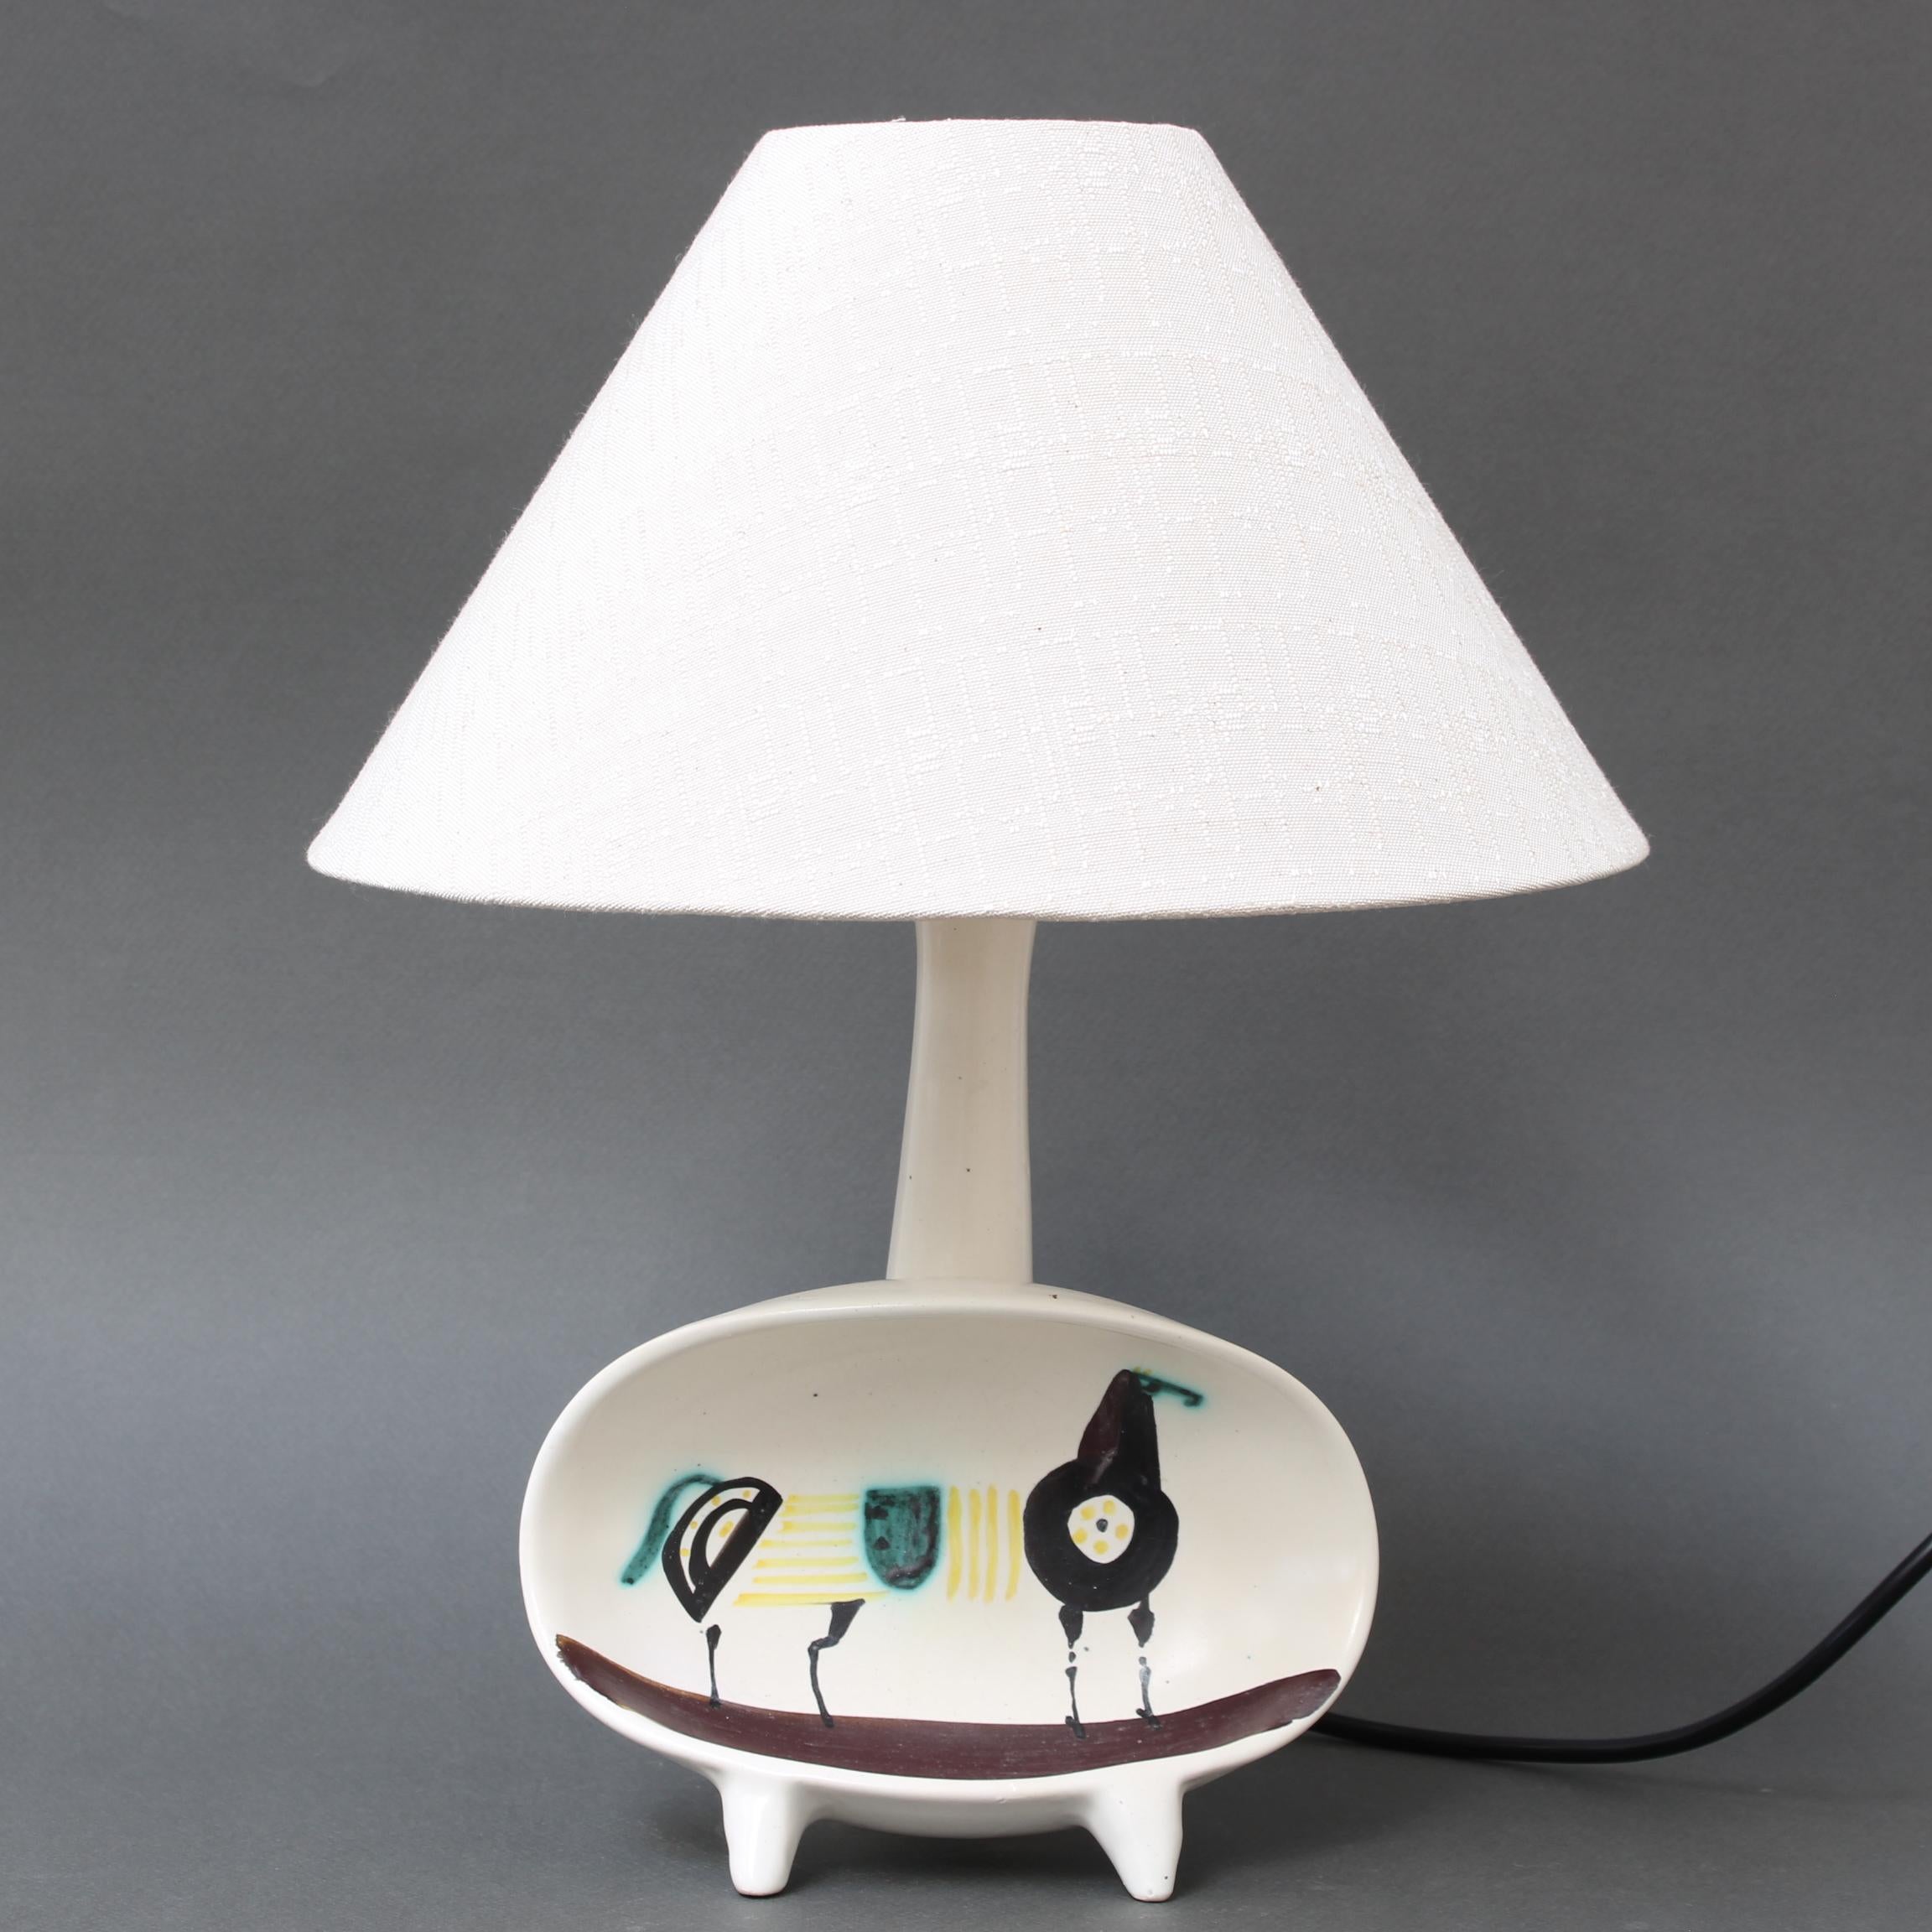 French decorative ceramic lamp with hand-painted horse by Roger Capron (circa 1950s). This is Capron's 'Coupe n°2 lamp' which is signed in the interior of the vertical base. A rare piece indeed, hand-painted with a stylised horse in his inimitable